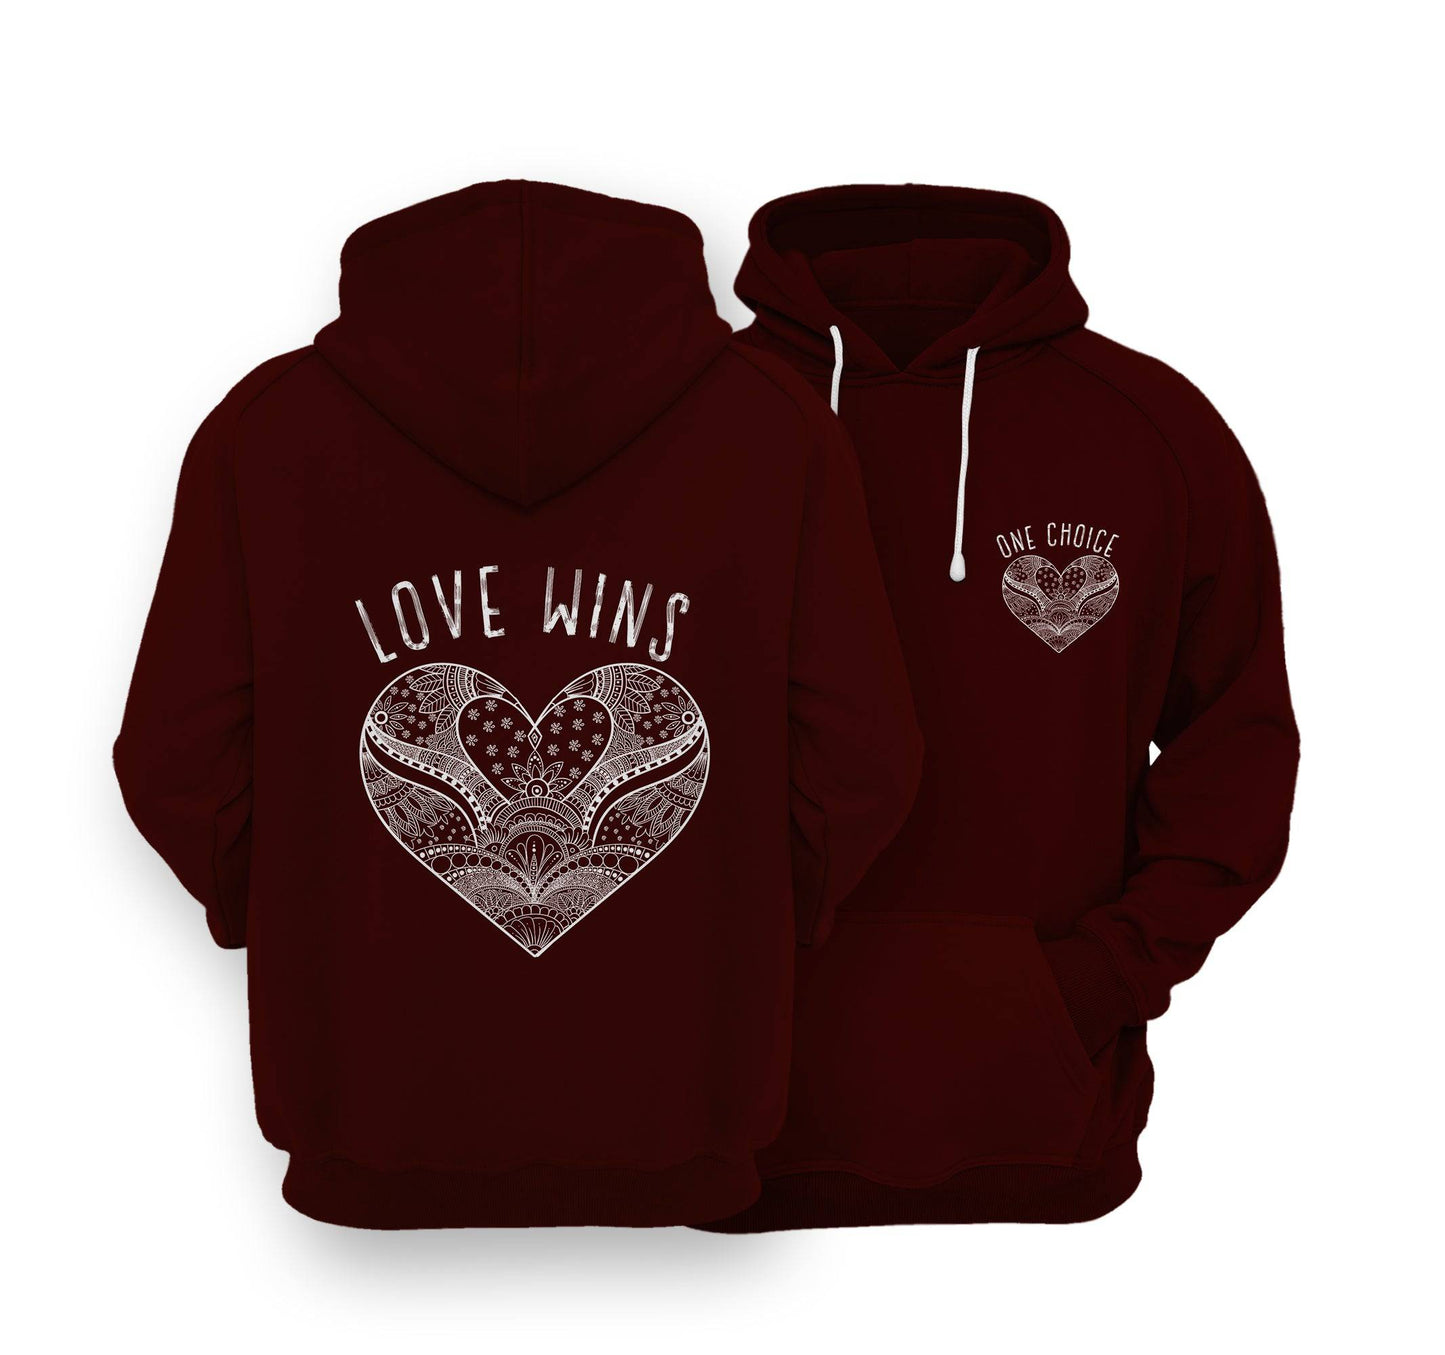 Sustainable Hoodie - Love Wins - One Choice Apparel